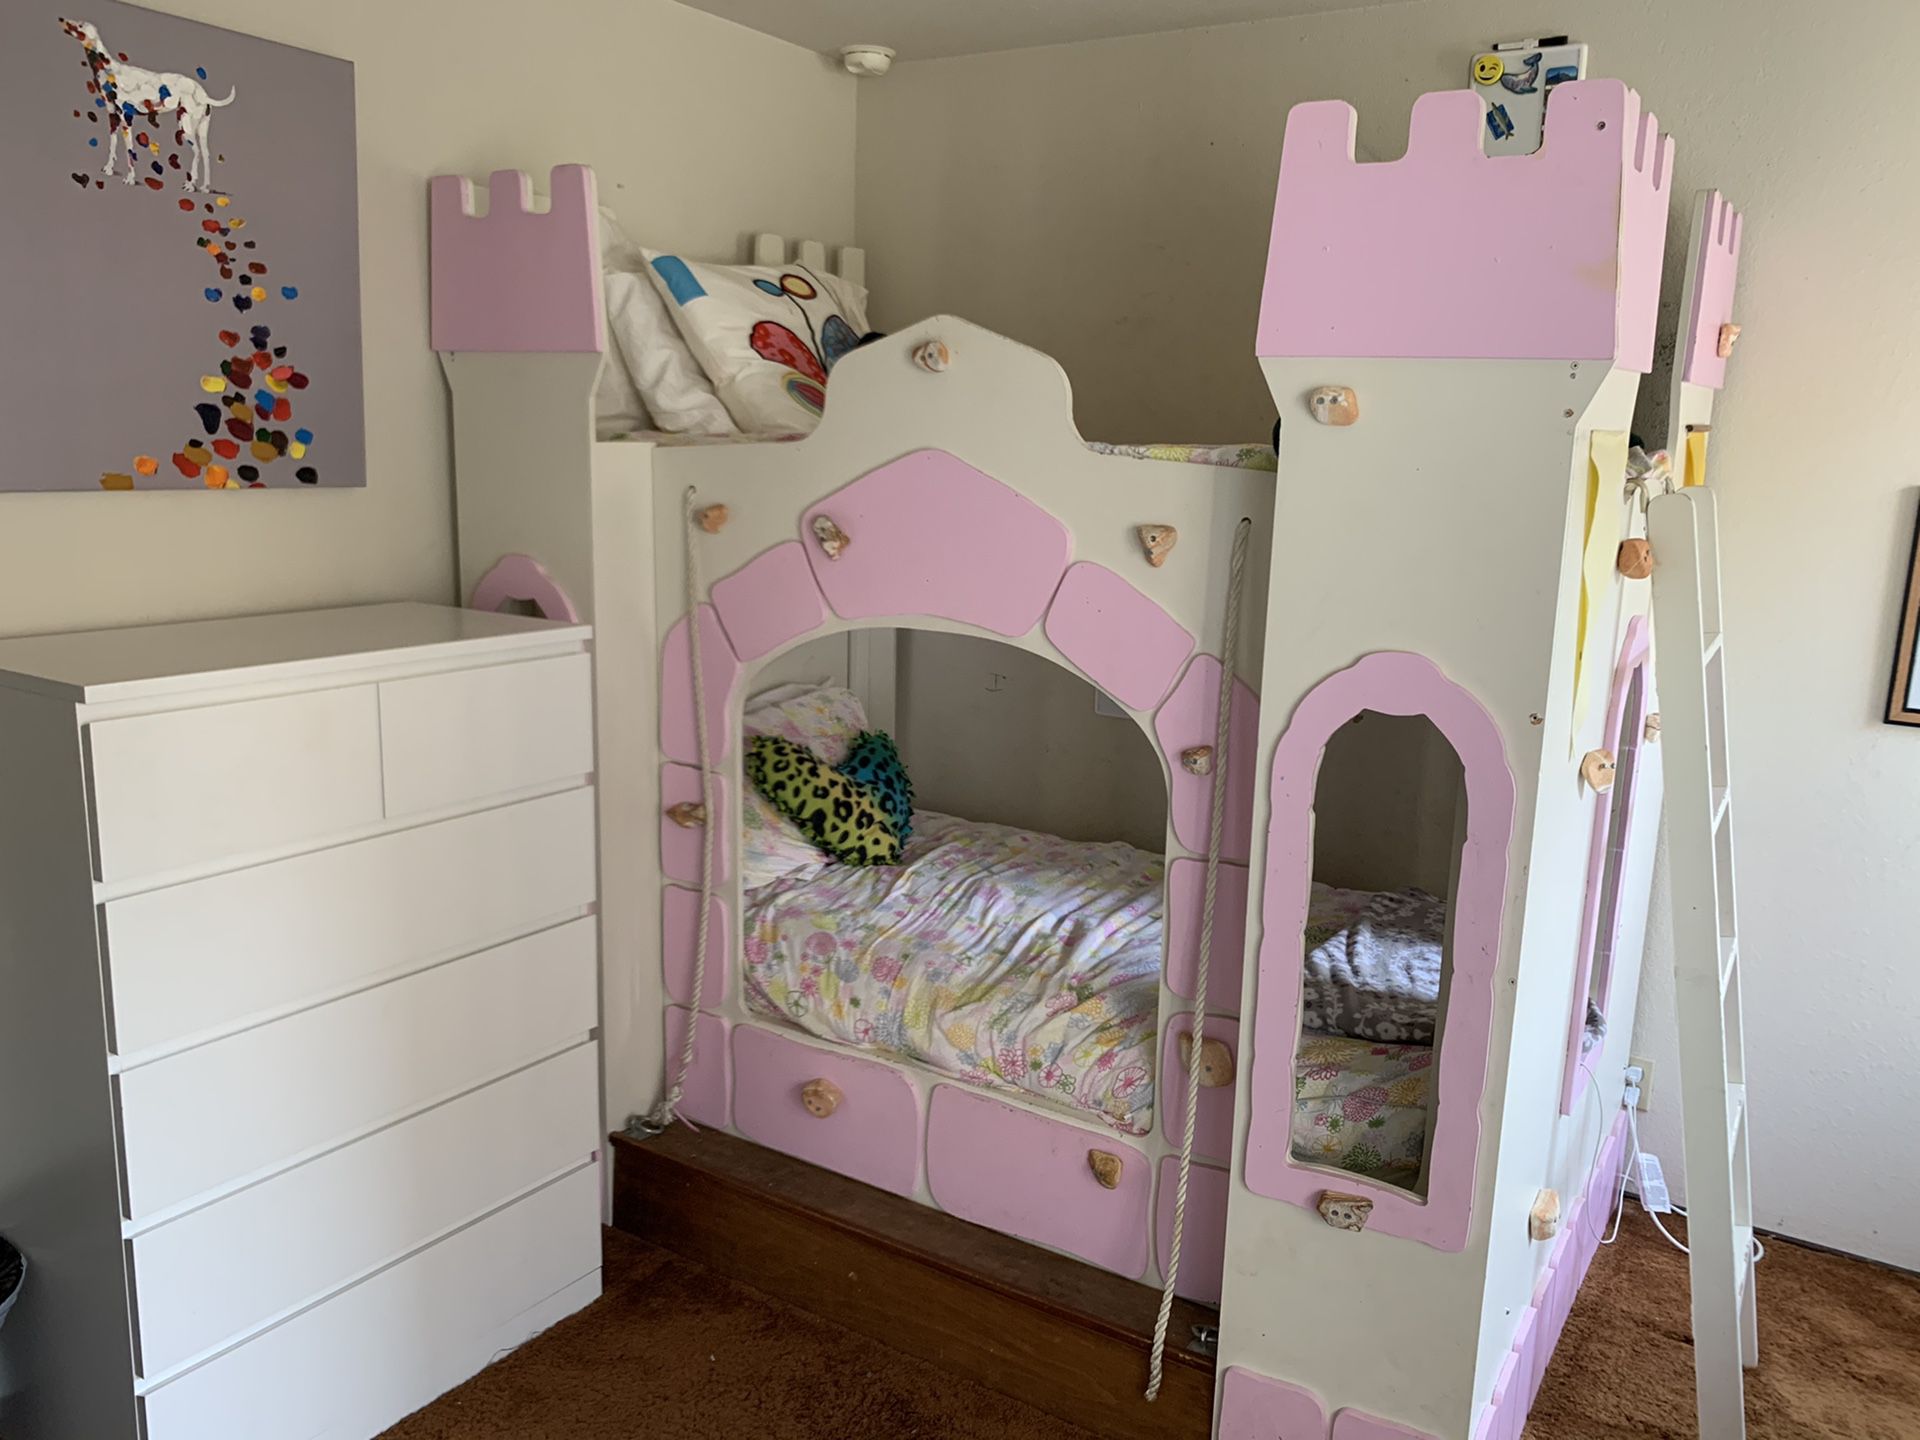 Bunk bed castle used and well-loved